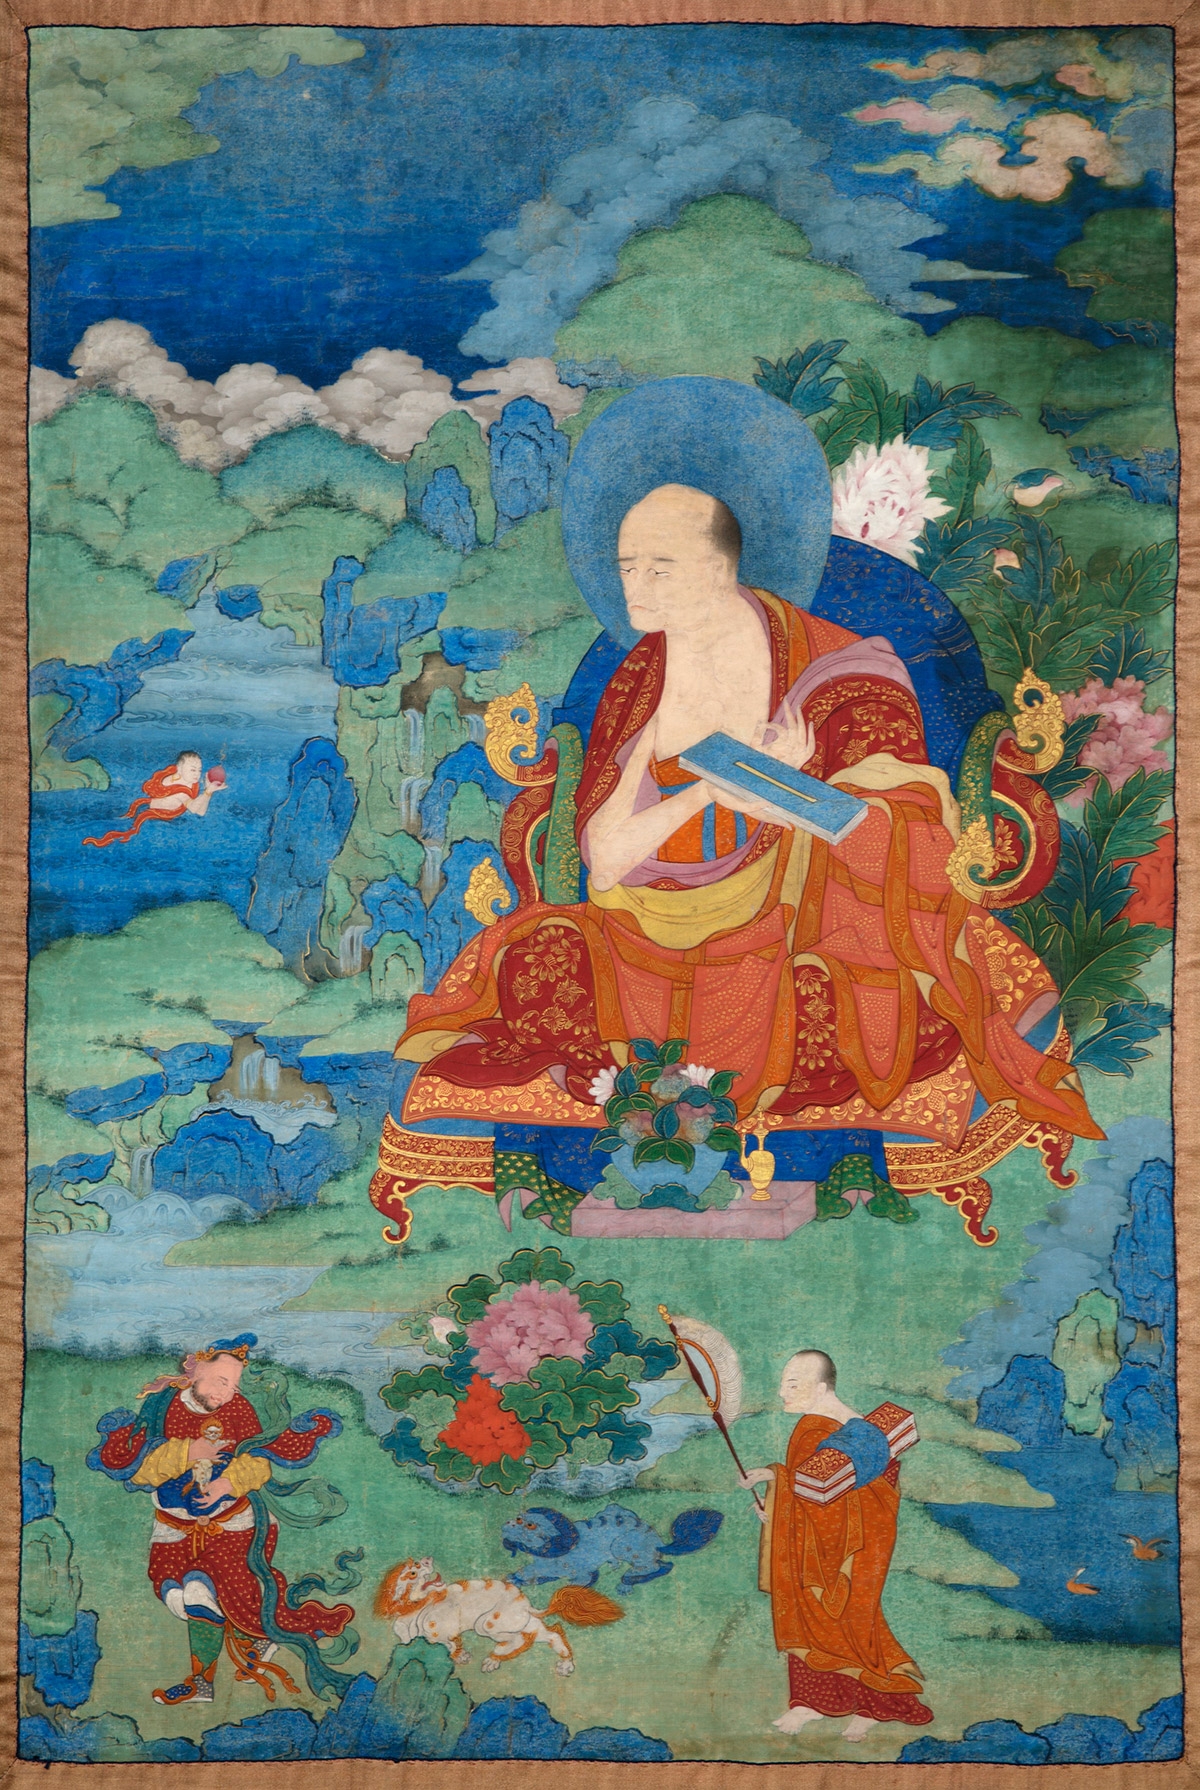 Gopaka Arhat. 17th century. Possibly Kham (East Tibet). Tradition: Gelug. Pigments on cloth. MU-CIV/MAO "Giuseppe Tucci," inv. 934/767. Placement as indicated on verso: 5th from left. Image courtesy of the Museum of Civilisation/Museum of Oriental Art "Giuseppe Tucci," Rome.